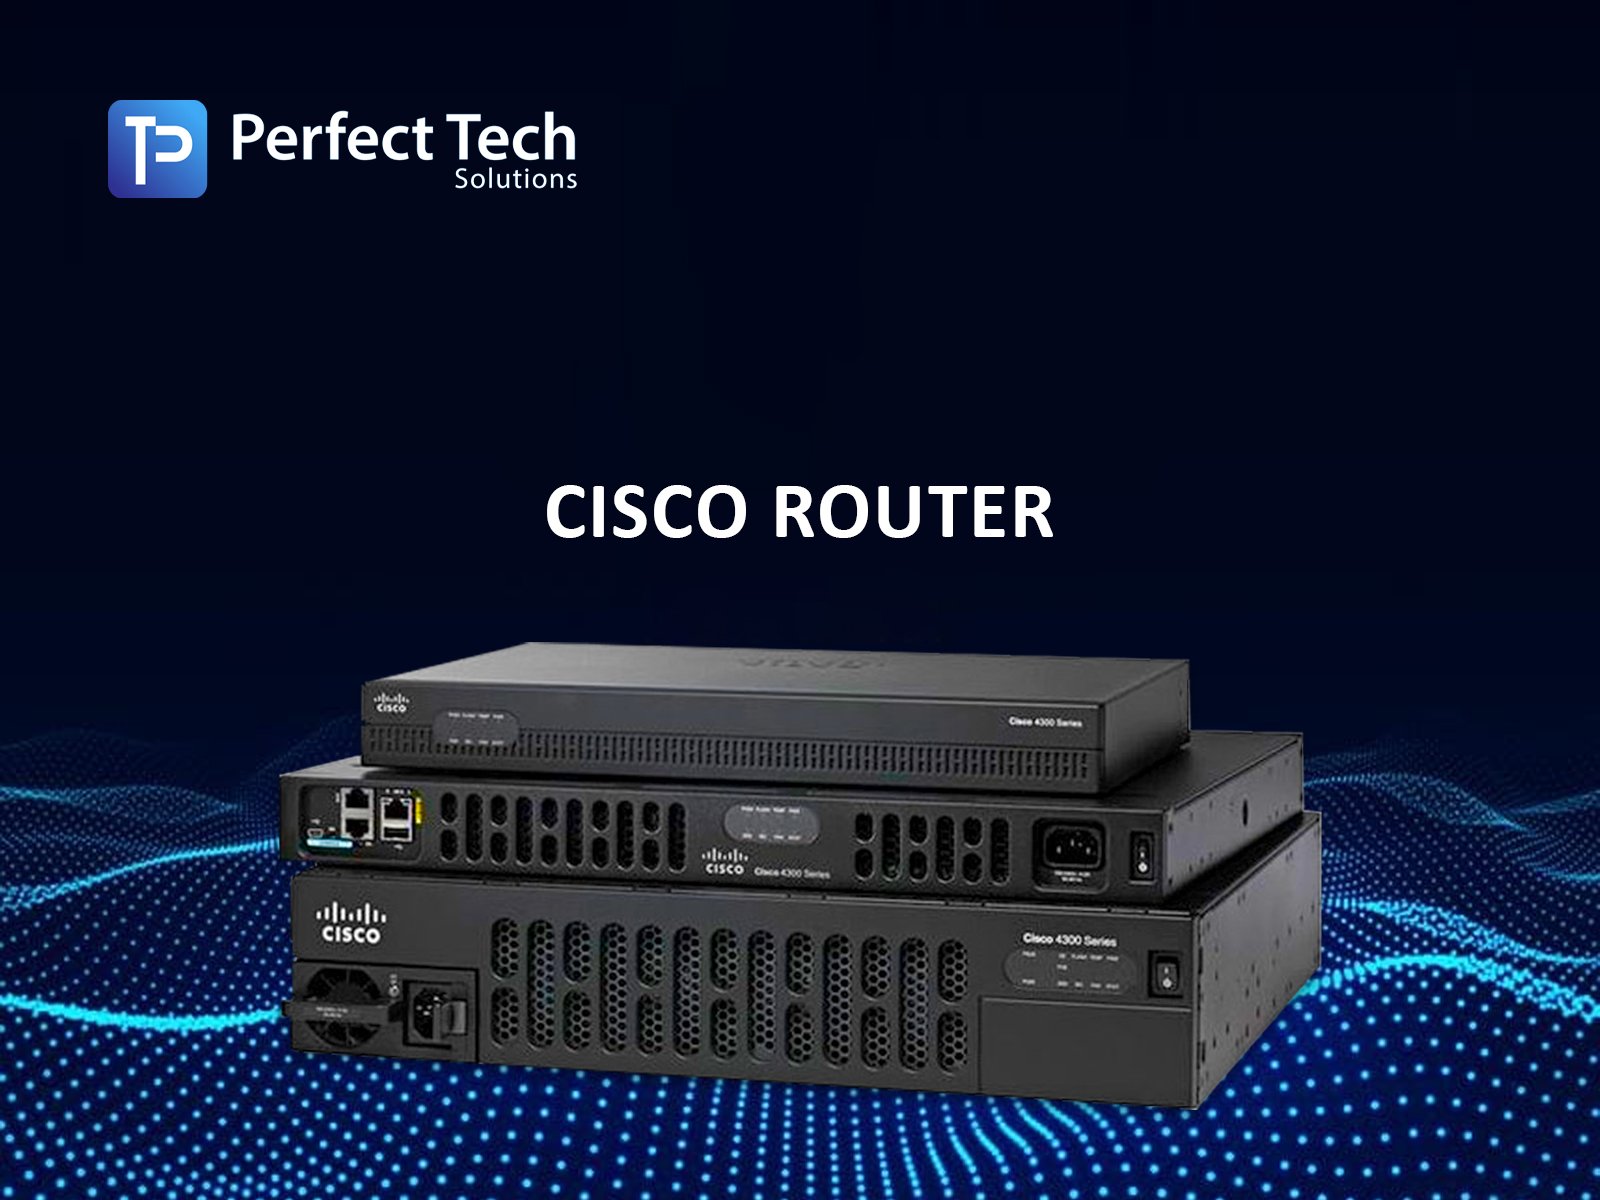 Cisco Router Will Provide Advanced Built-In Firewalls